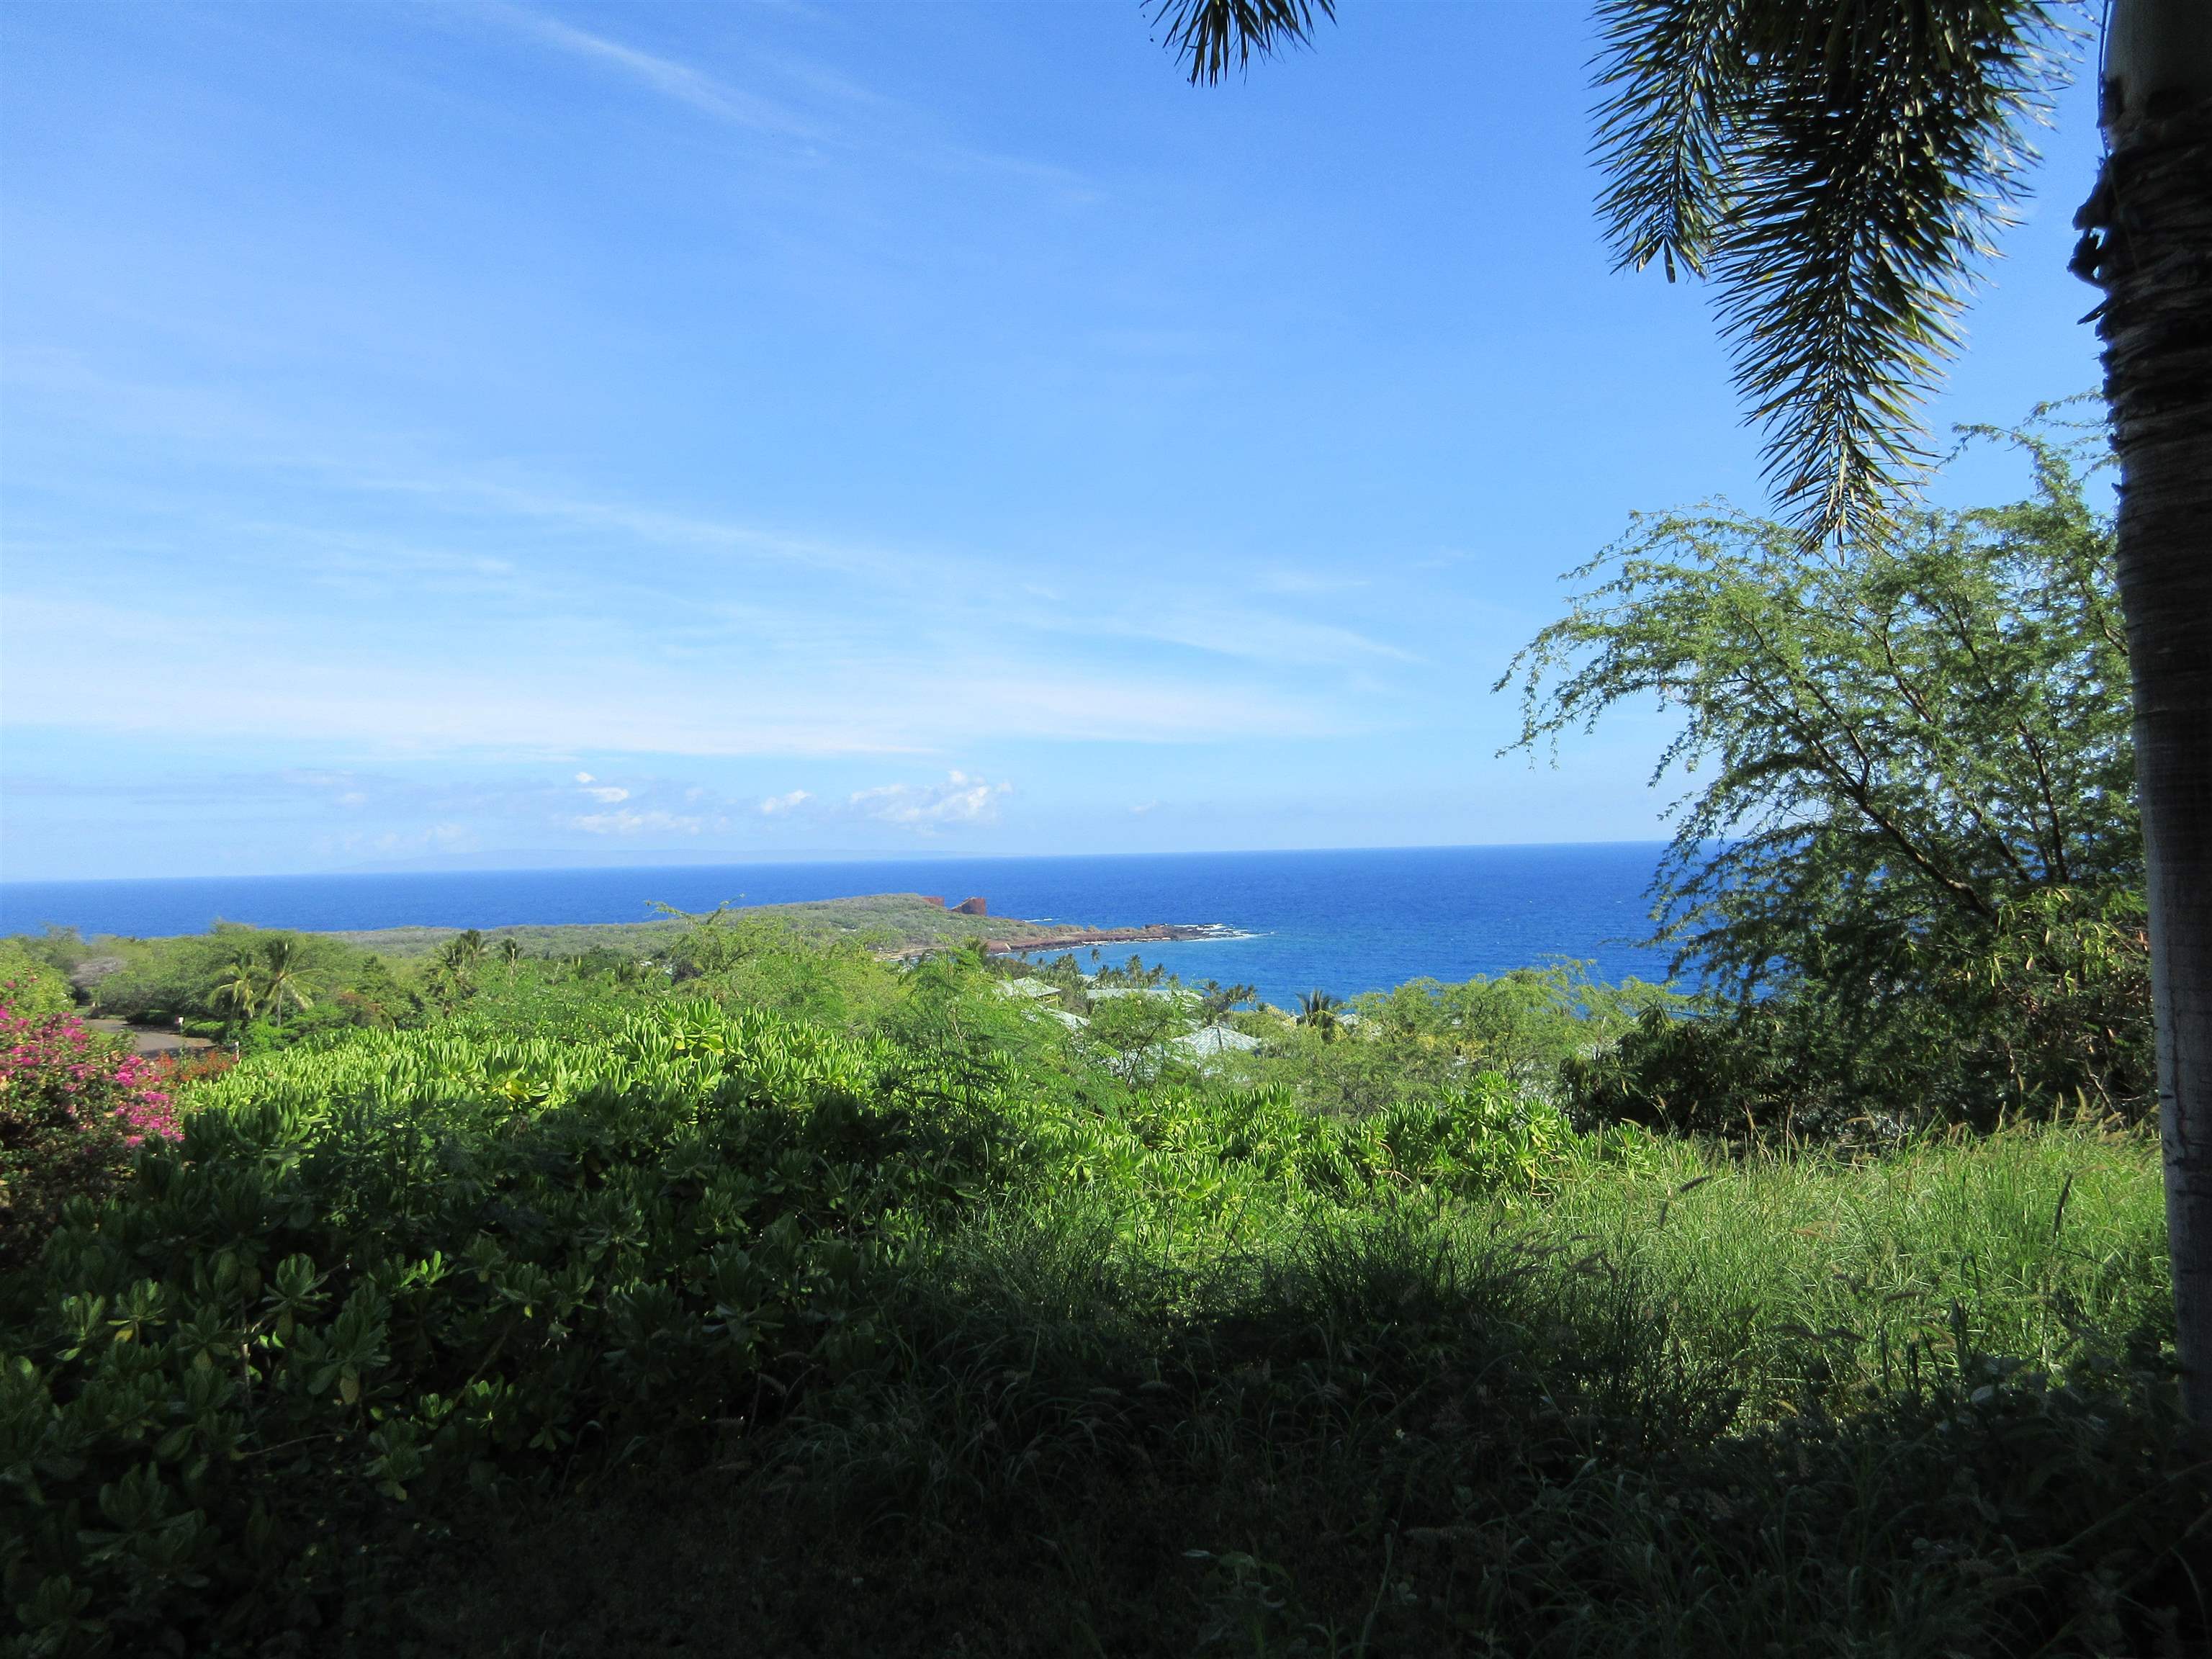 276 Hulopoe Dr  Lanai City, Hi vacant land for sale - photo 4 of 13